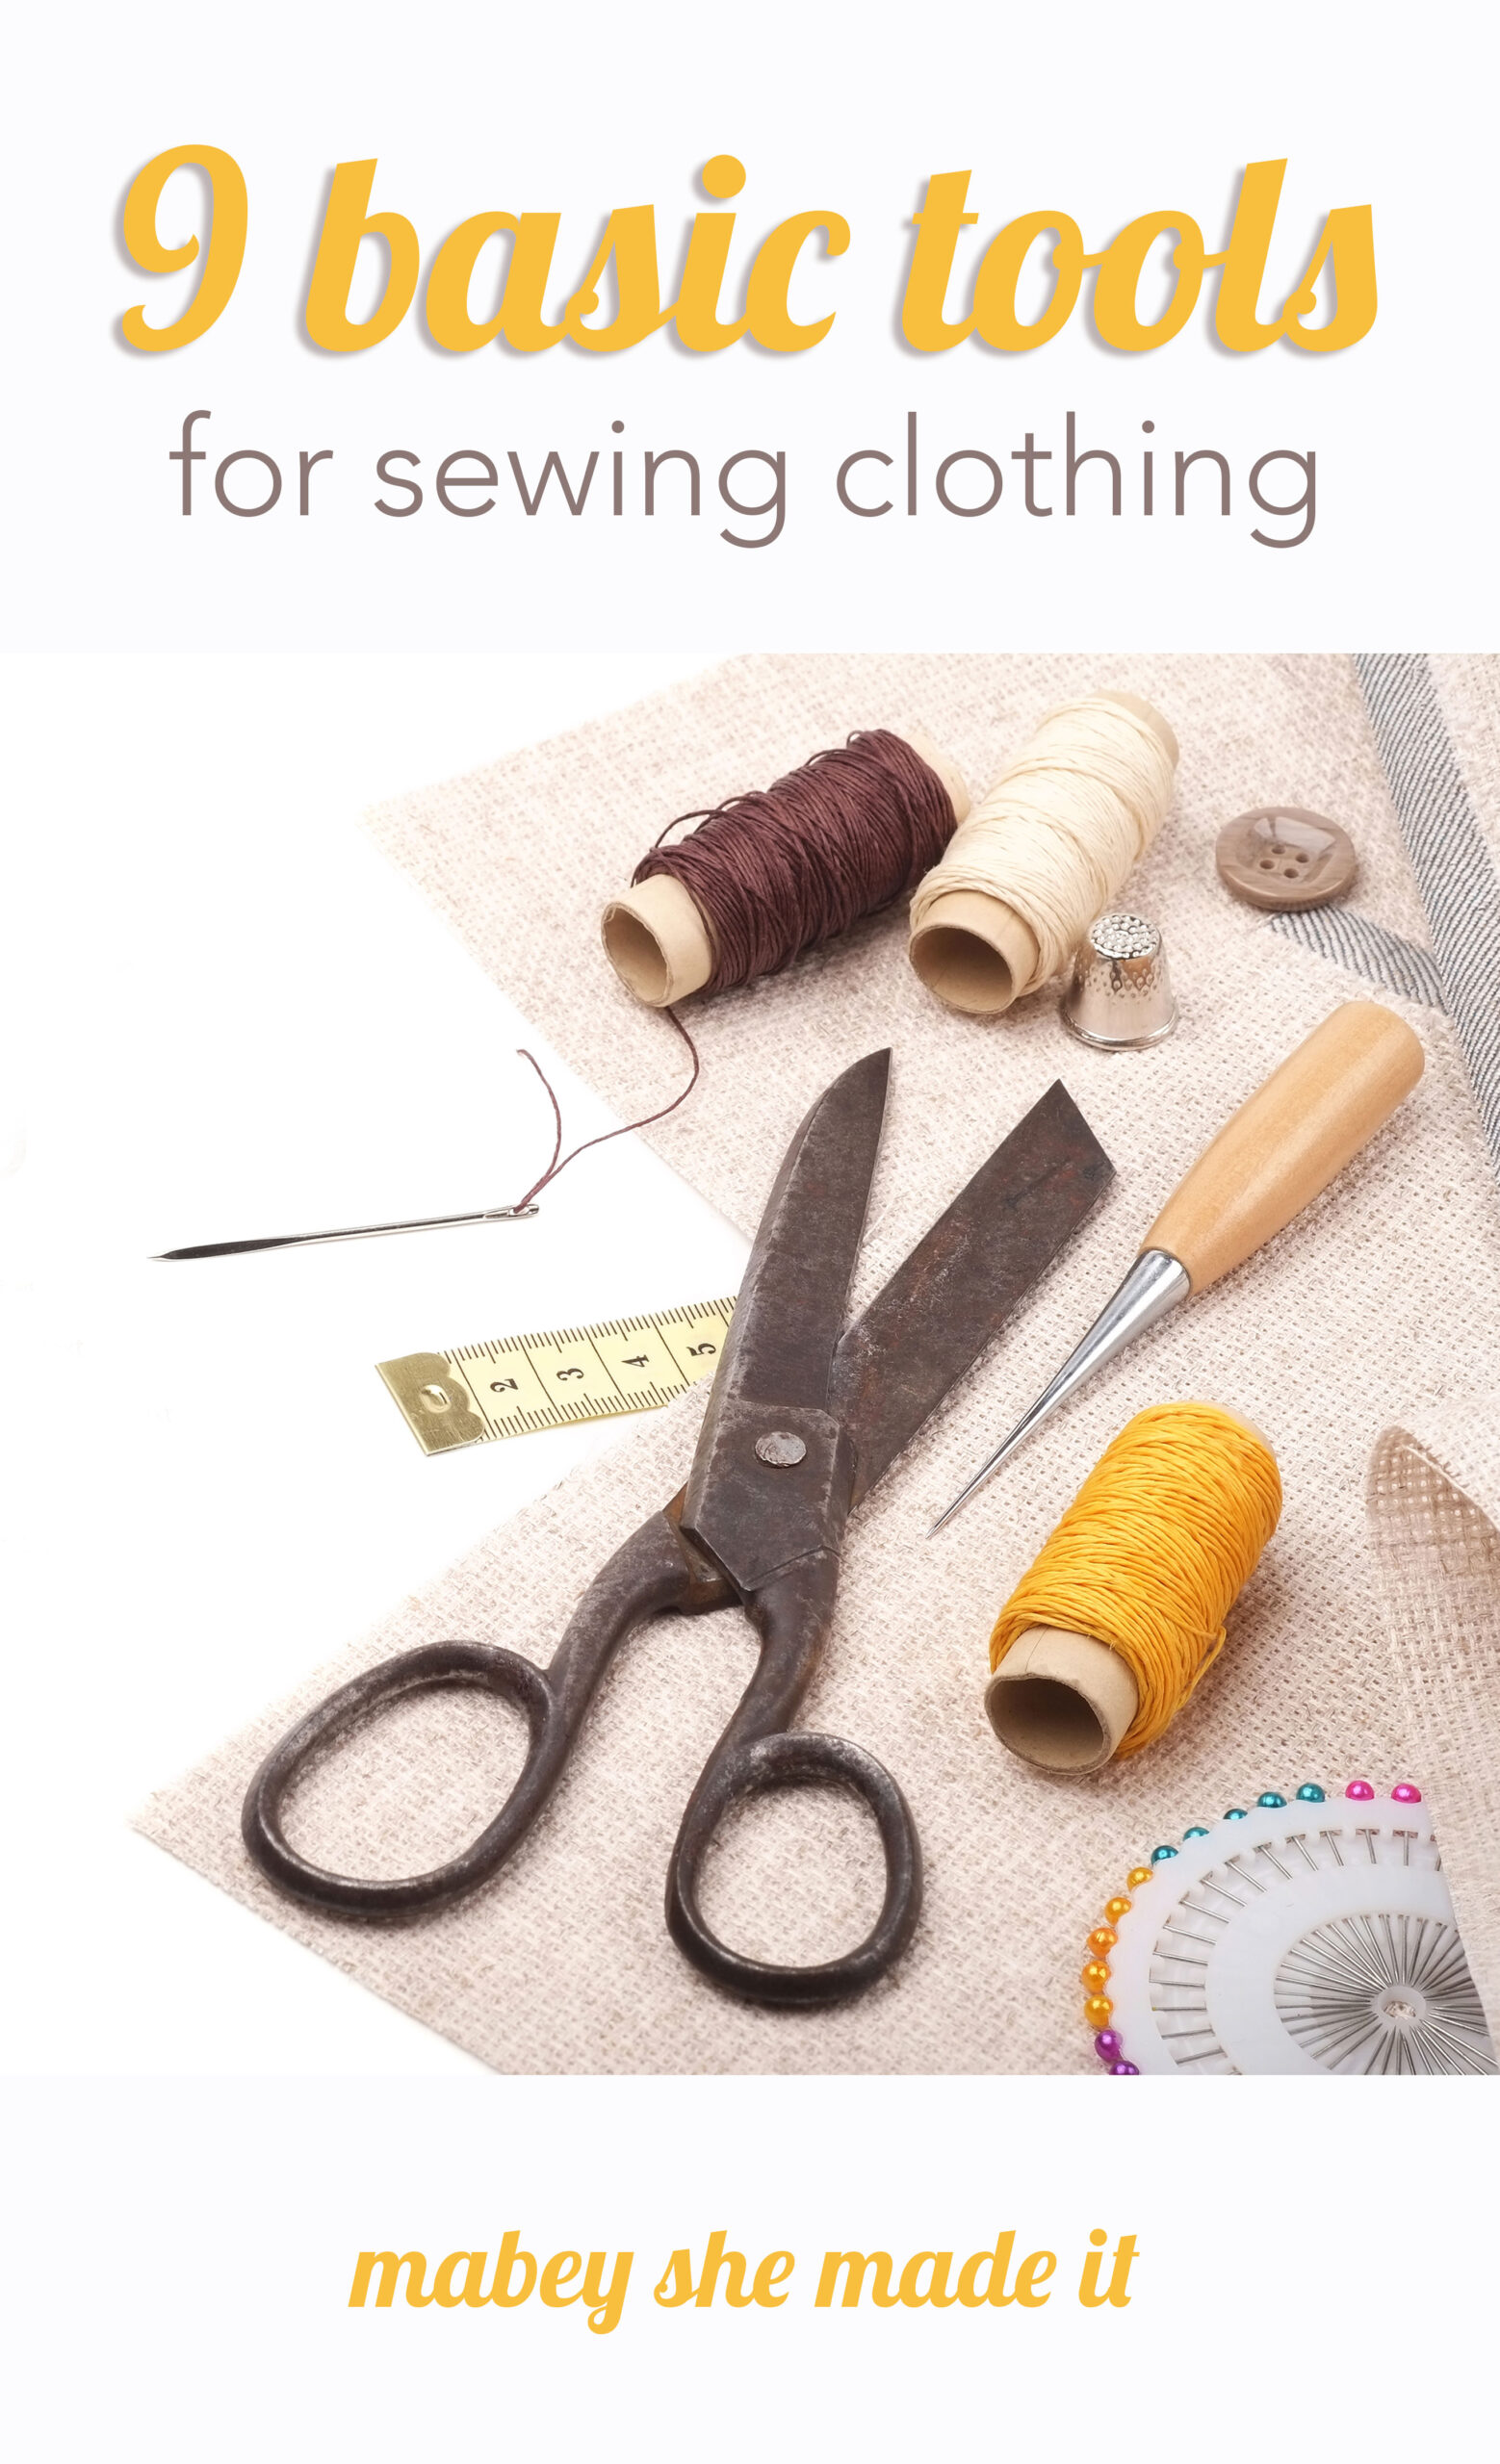 List of Sewing Supplies to Get Started Sewing